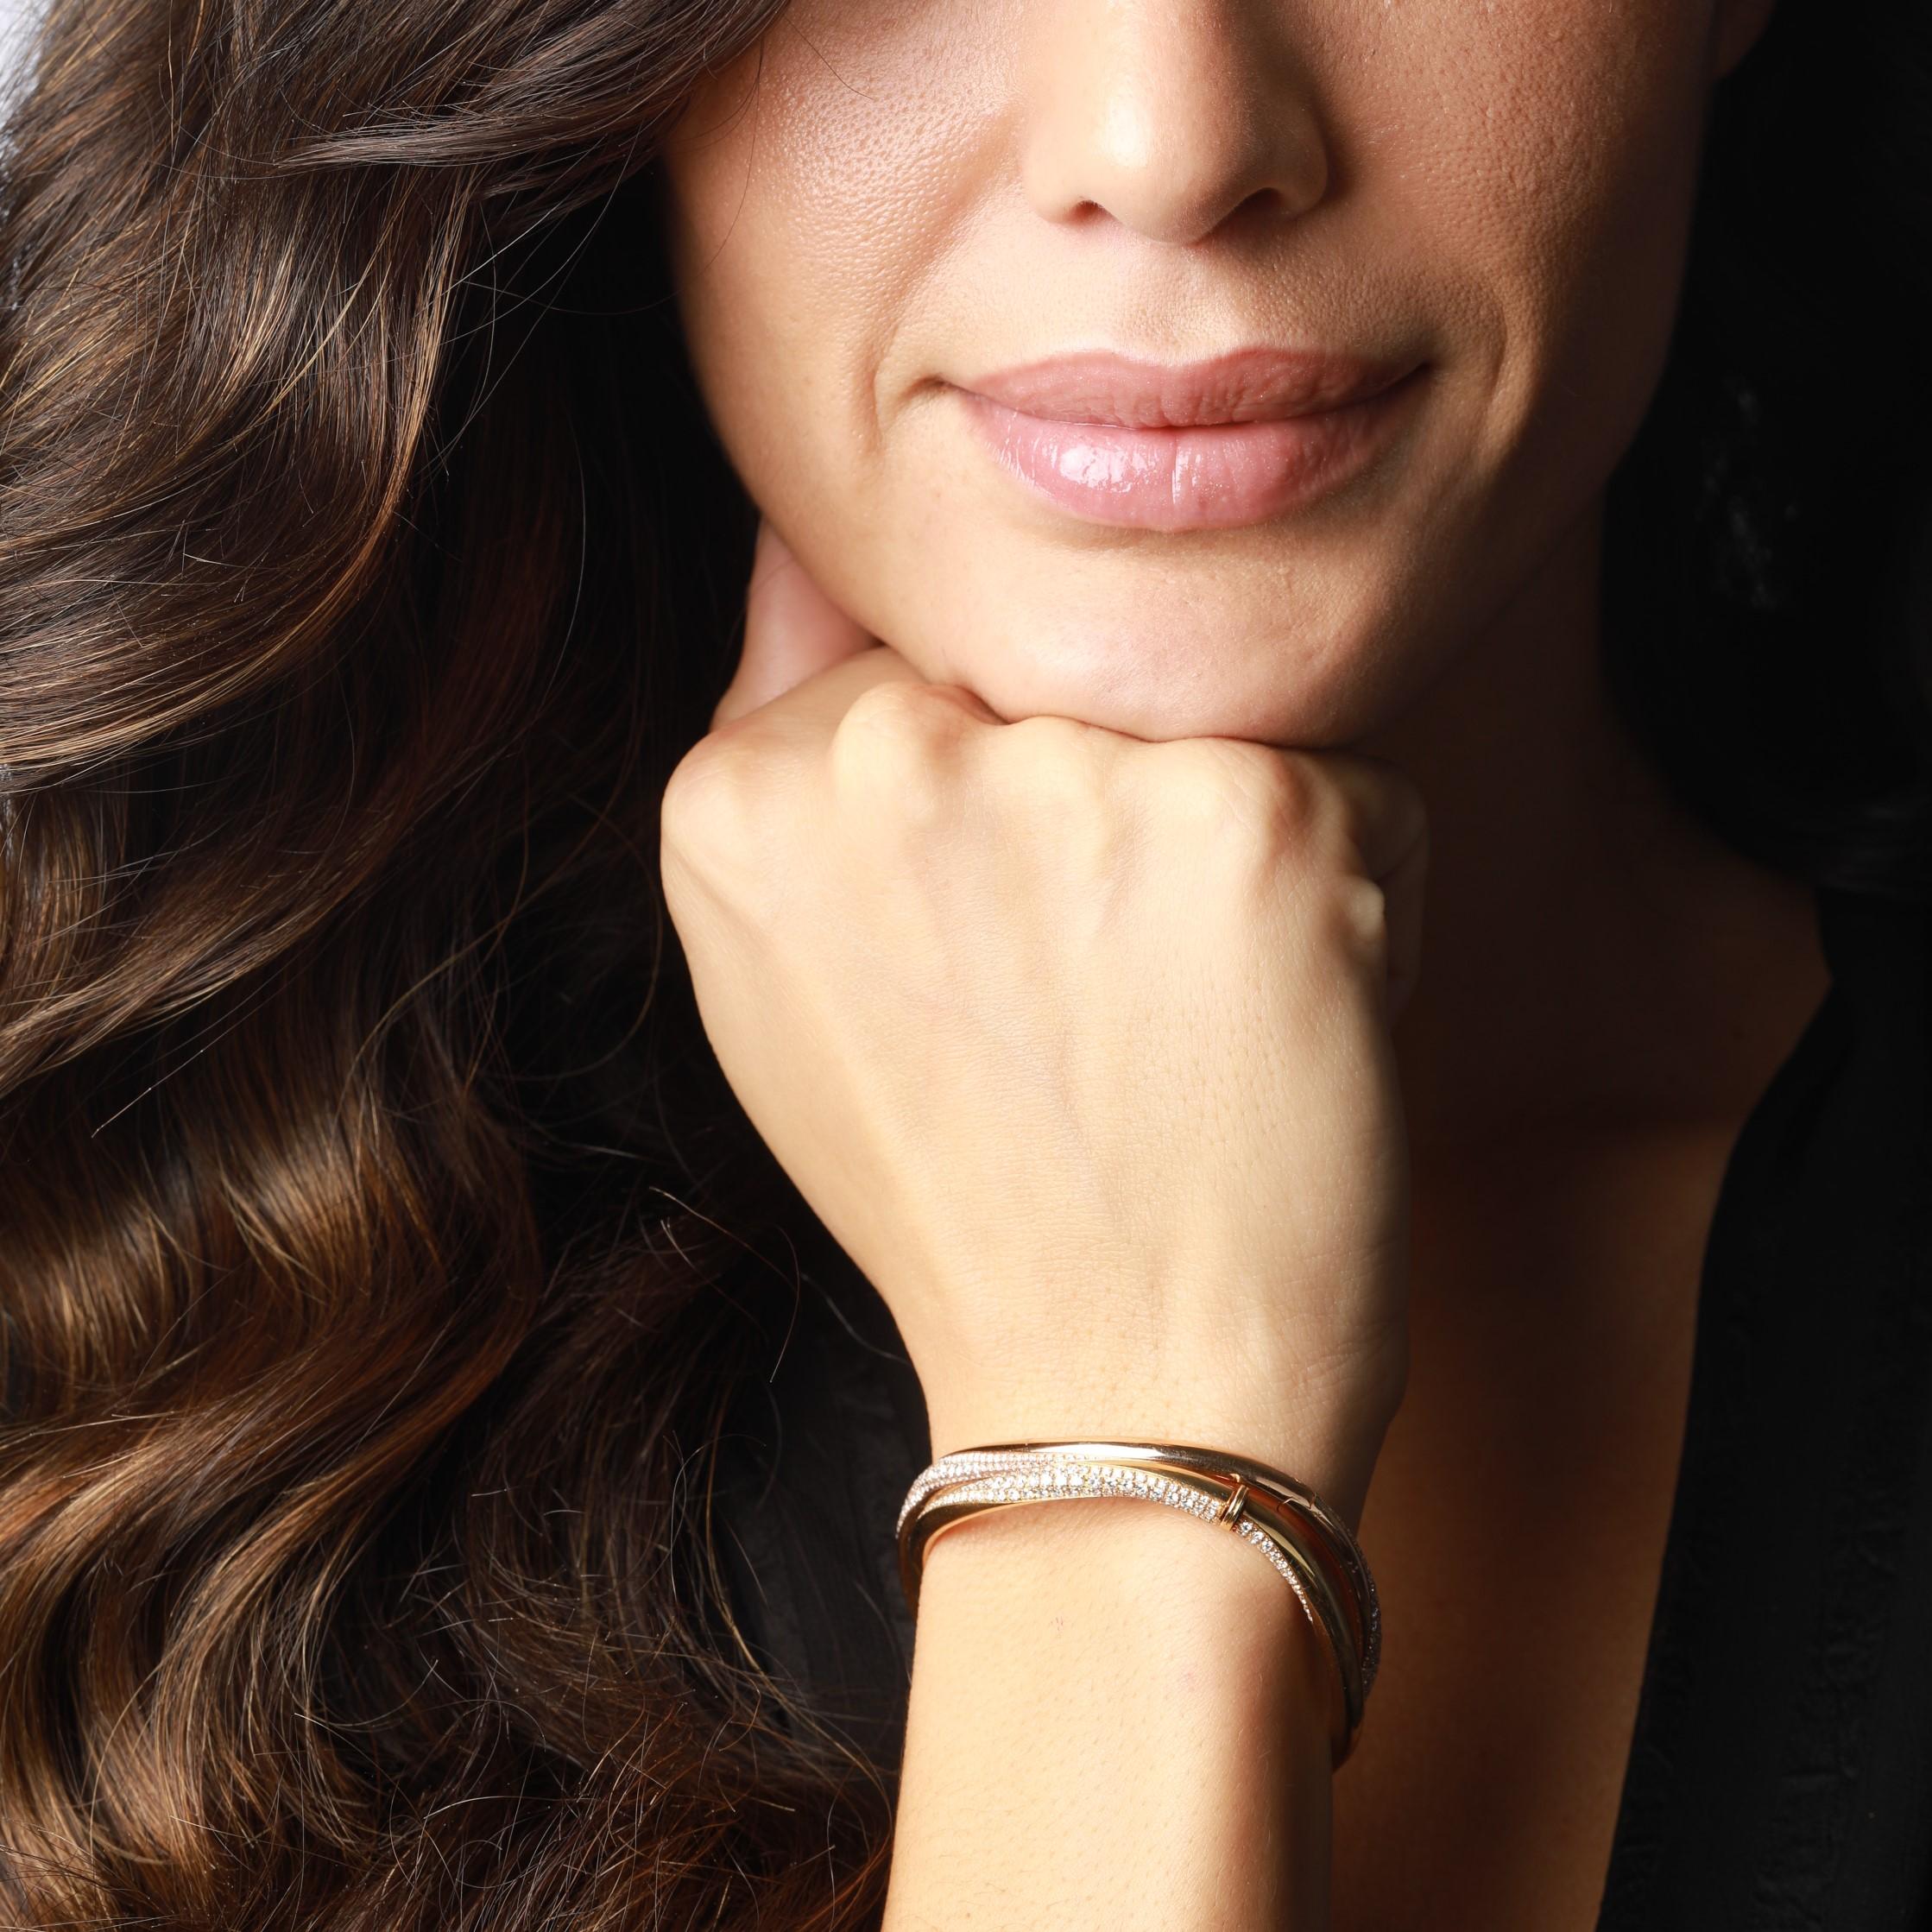 London jeweller David Morris is known for its classics with a twist, and this gold and white diamond bangle gives a timeless jewellery staple exactly that. This rose gold bangle has an unusual, slightly twisted composition that creates a wave-like